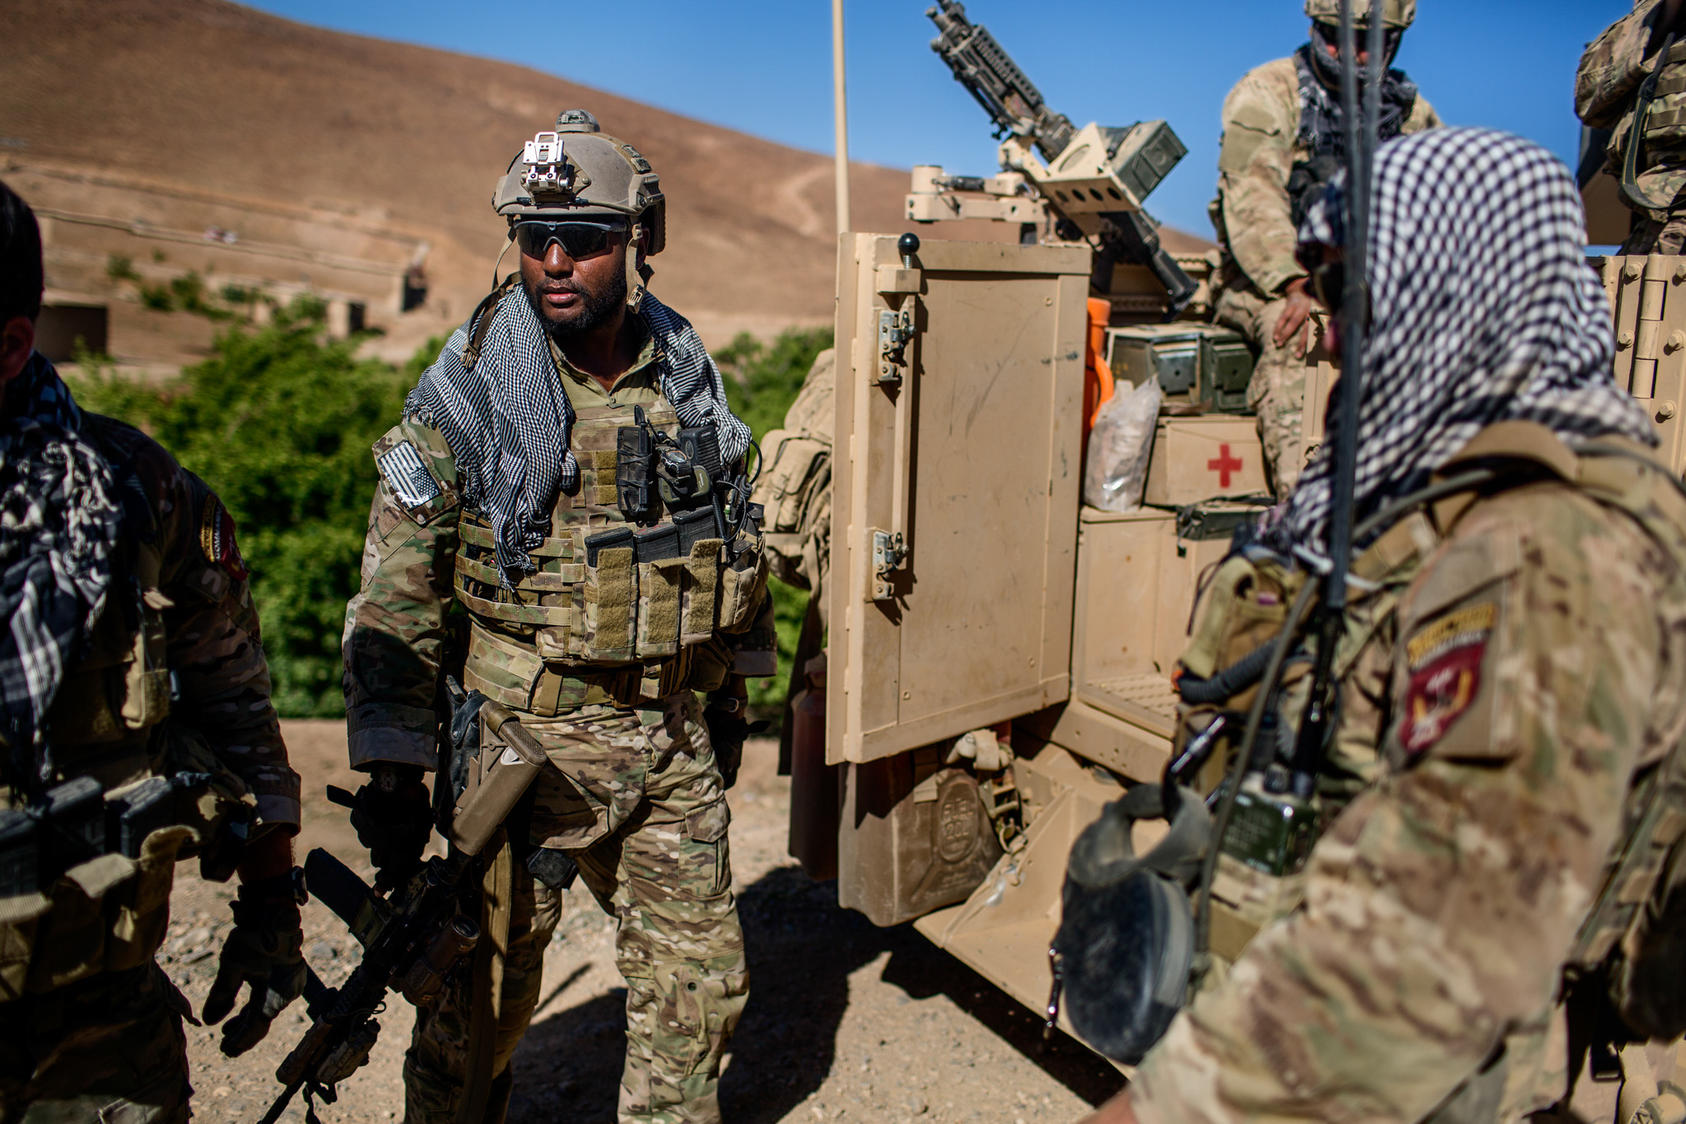 American and Afghan Special Forces soldiers during a patrol in Afghanistan's Parwan province, June 26, 2014. President Obama will announce on Thursday, Oct. 15, 2015 that the U.S. will halt its military withdrawal from Afghanistan and instead keep thousands of troops in the country through the end of his term in 2017.